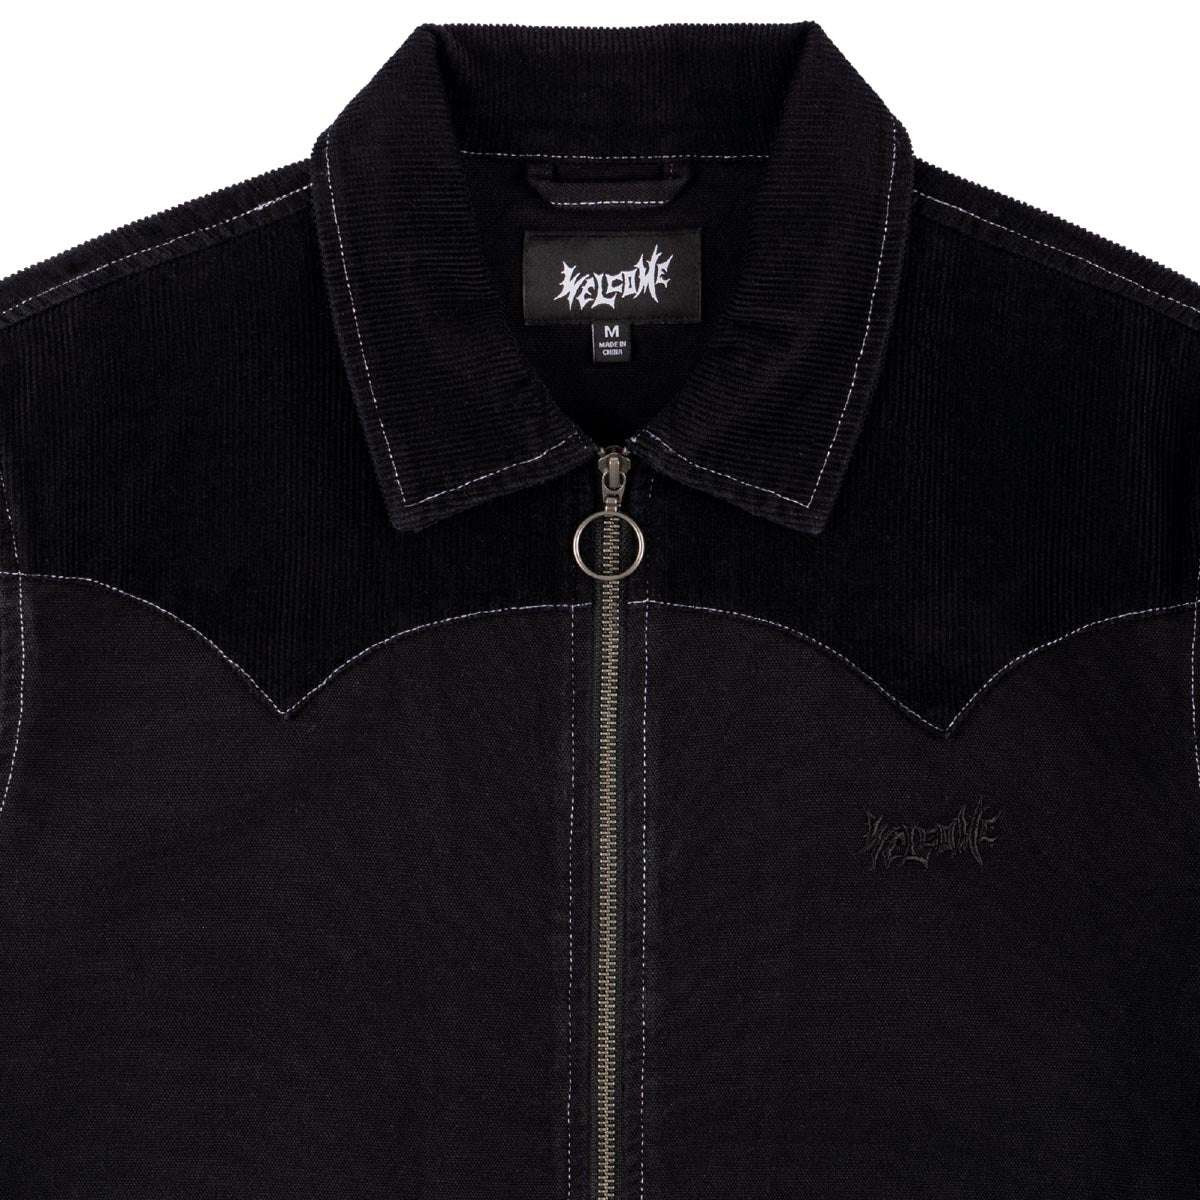 Welcome Outlaw Western Jacket - Black image 4